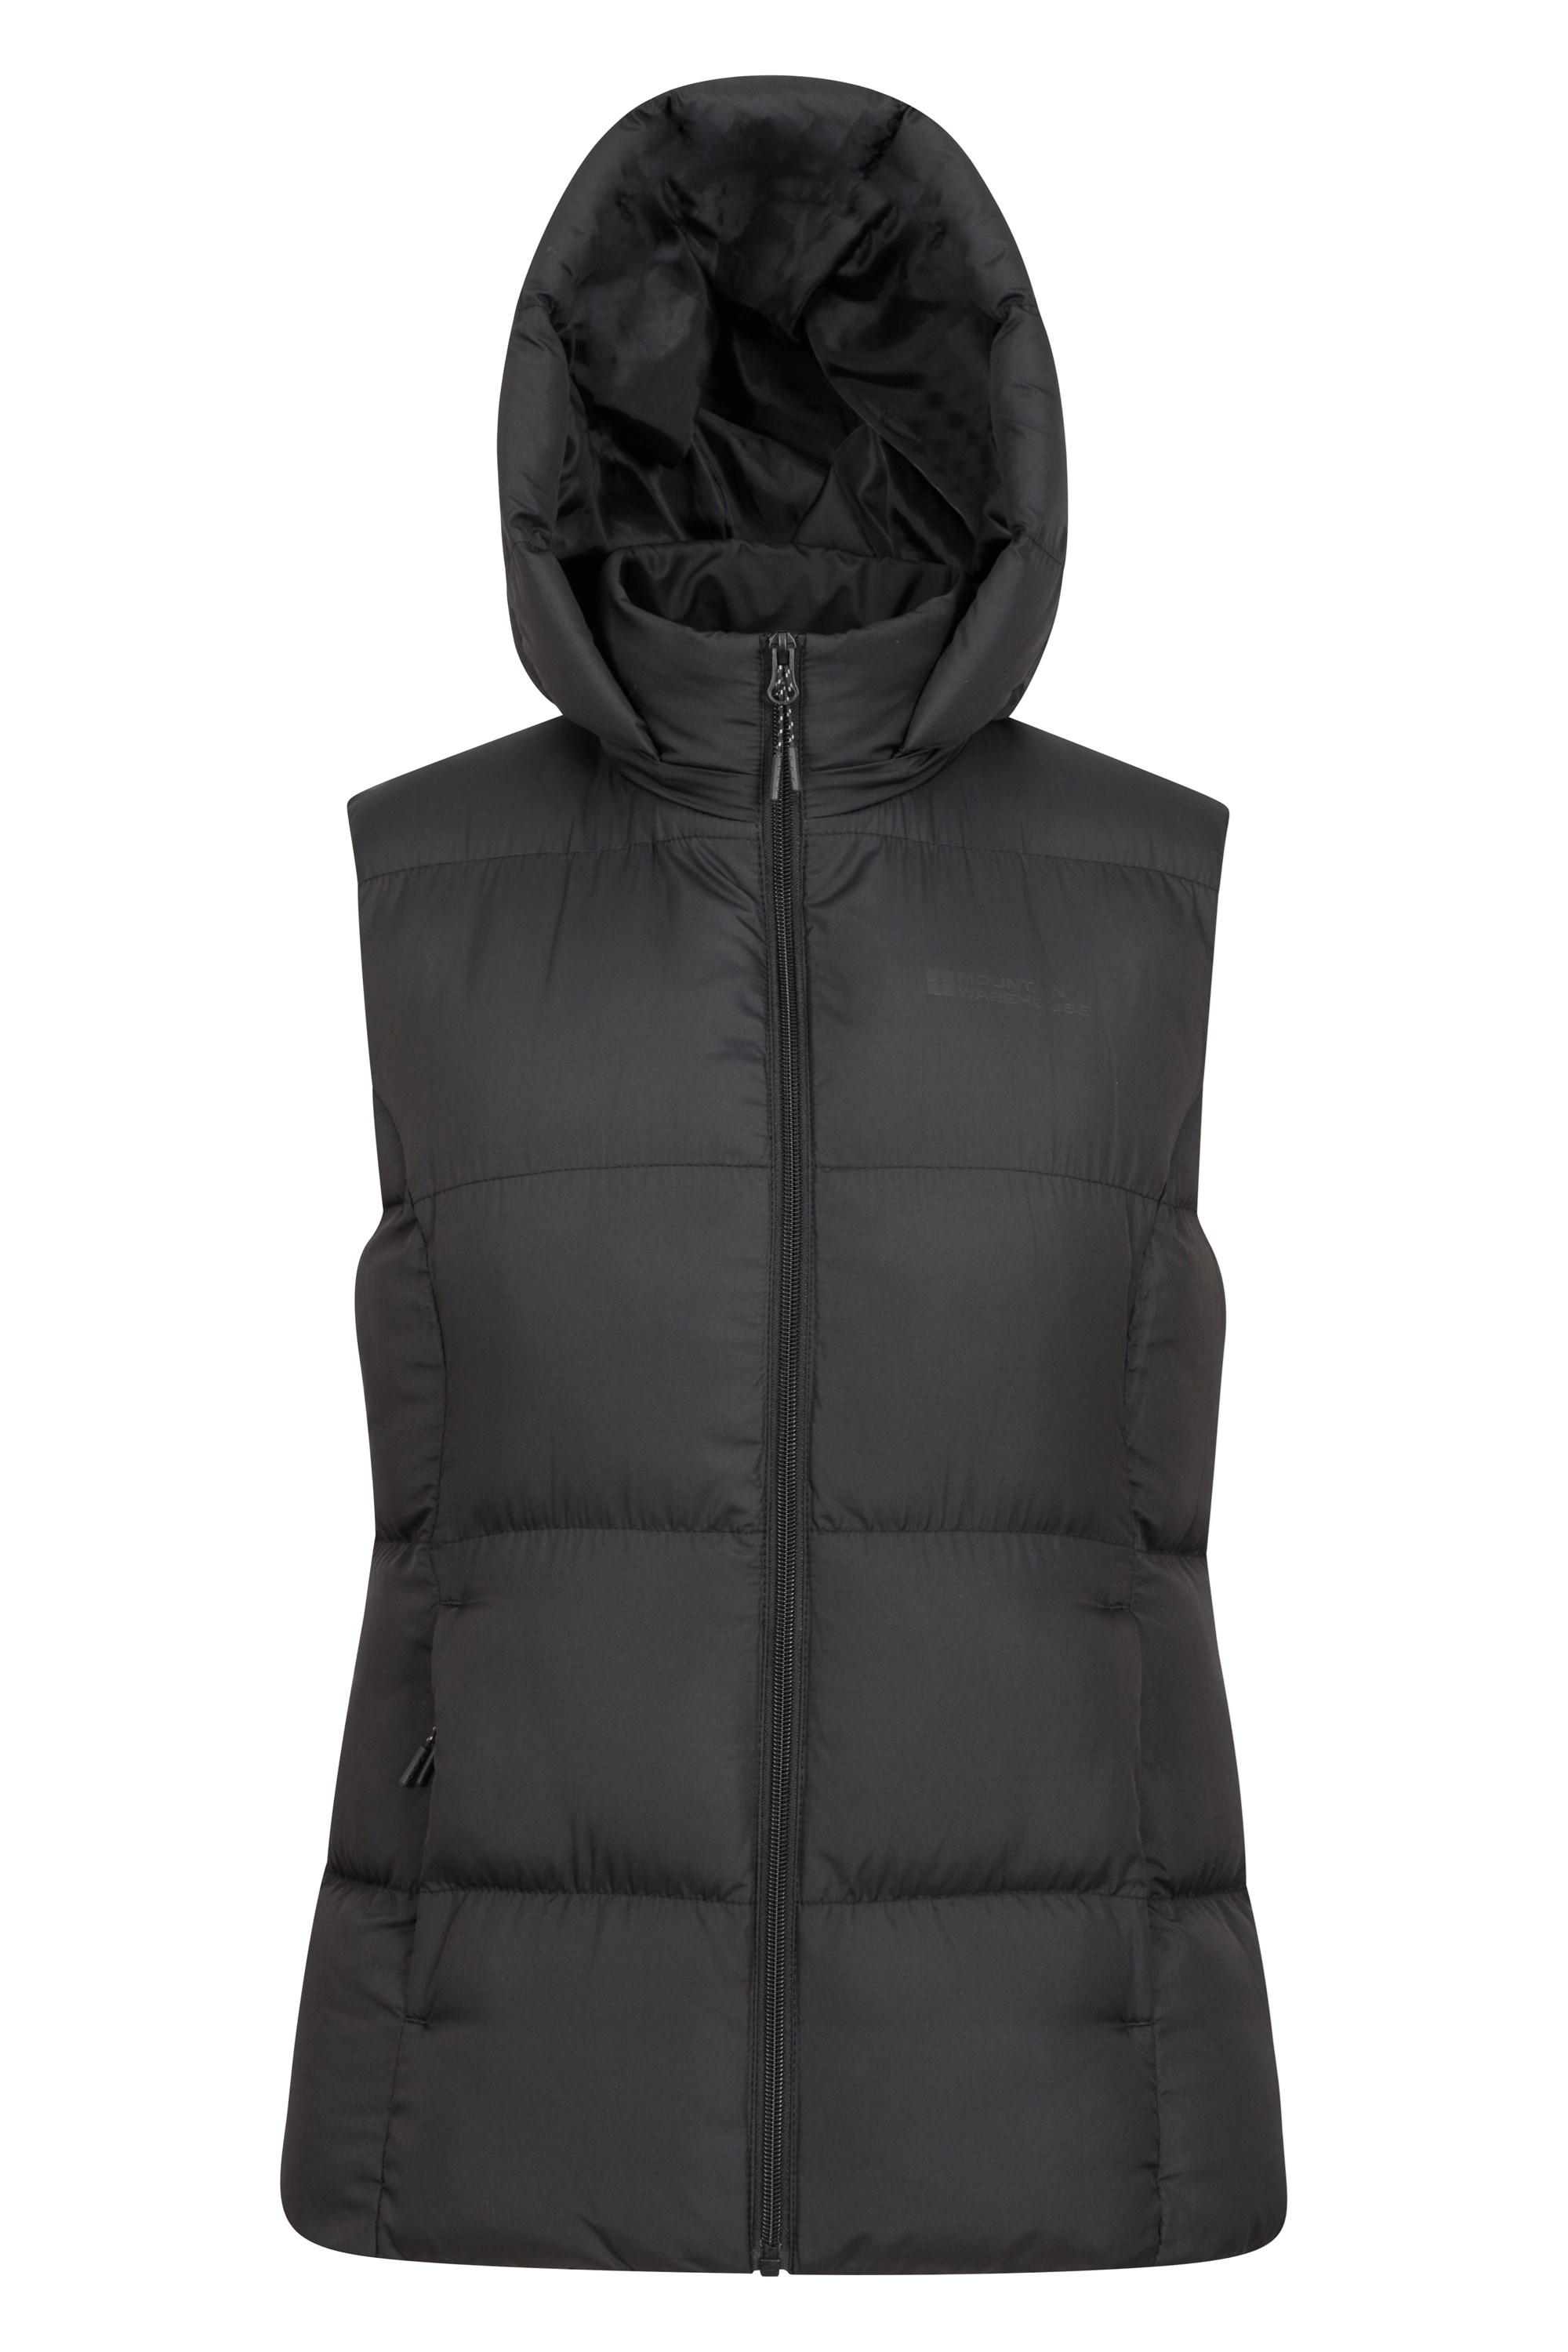 Astral Womens Padded Gilet | Mountain Warehouse GB